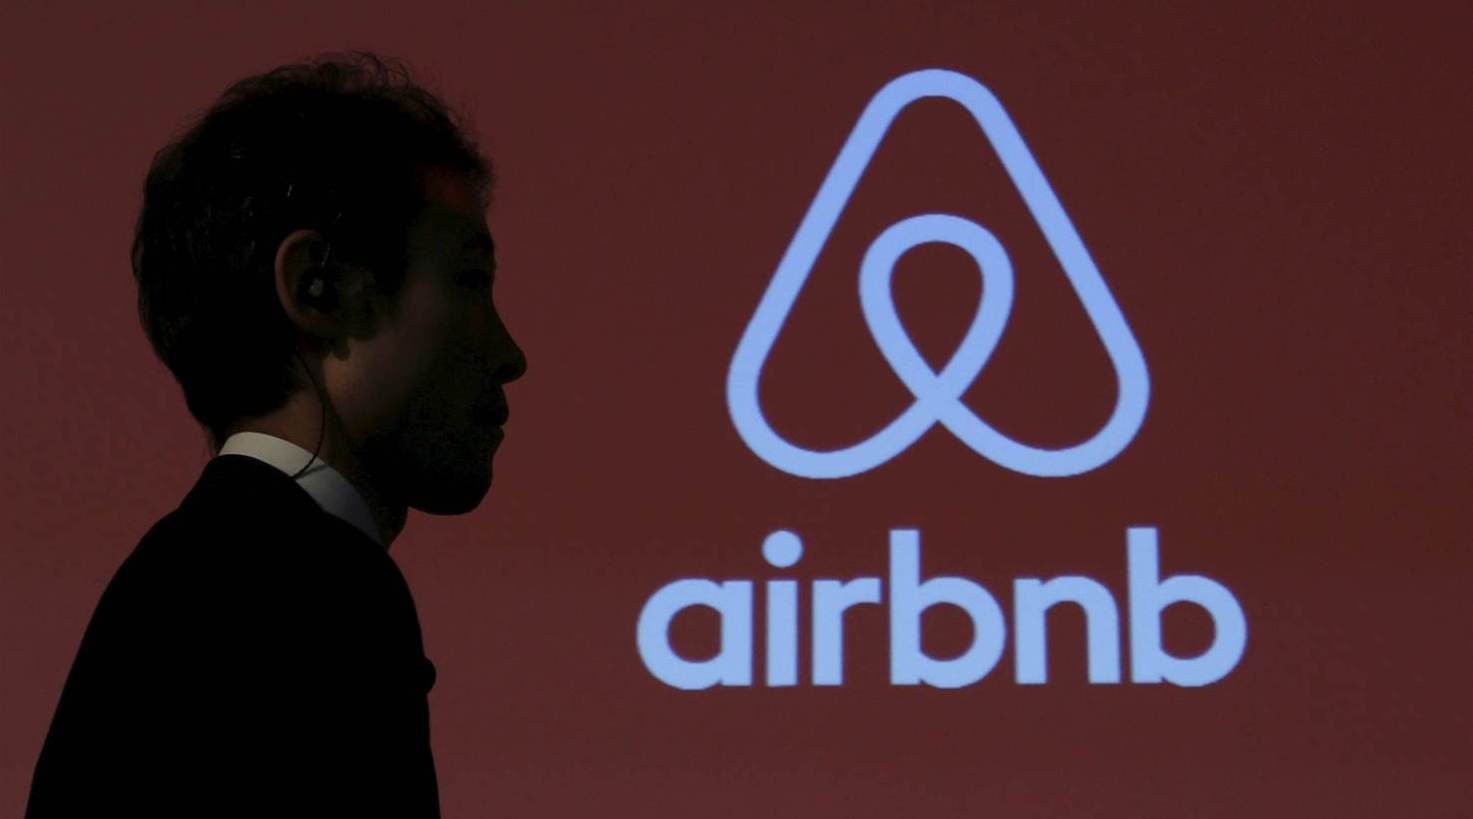 Home rental major Airbnb plans to make stock market debut in 2020